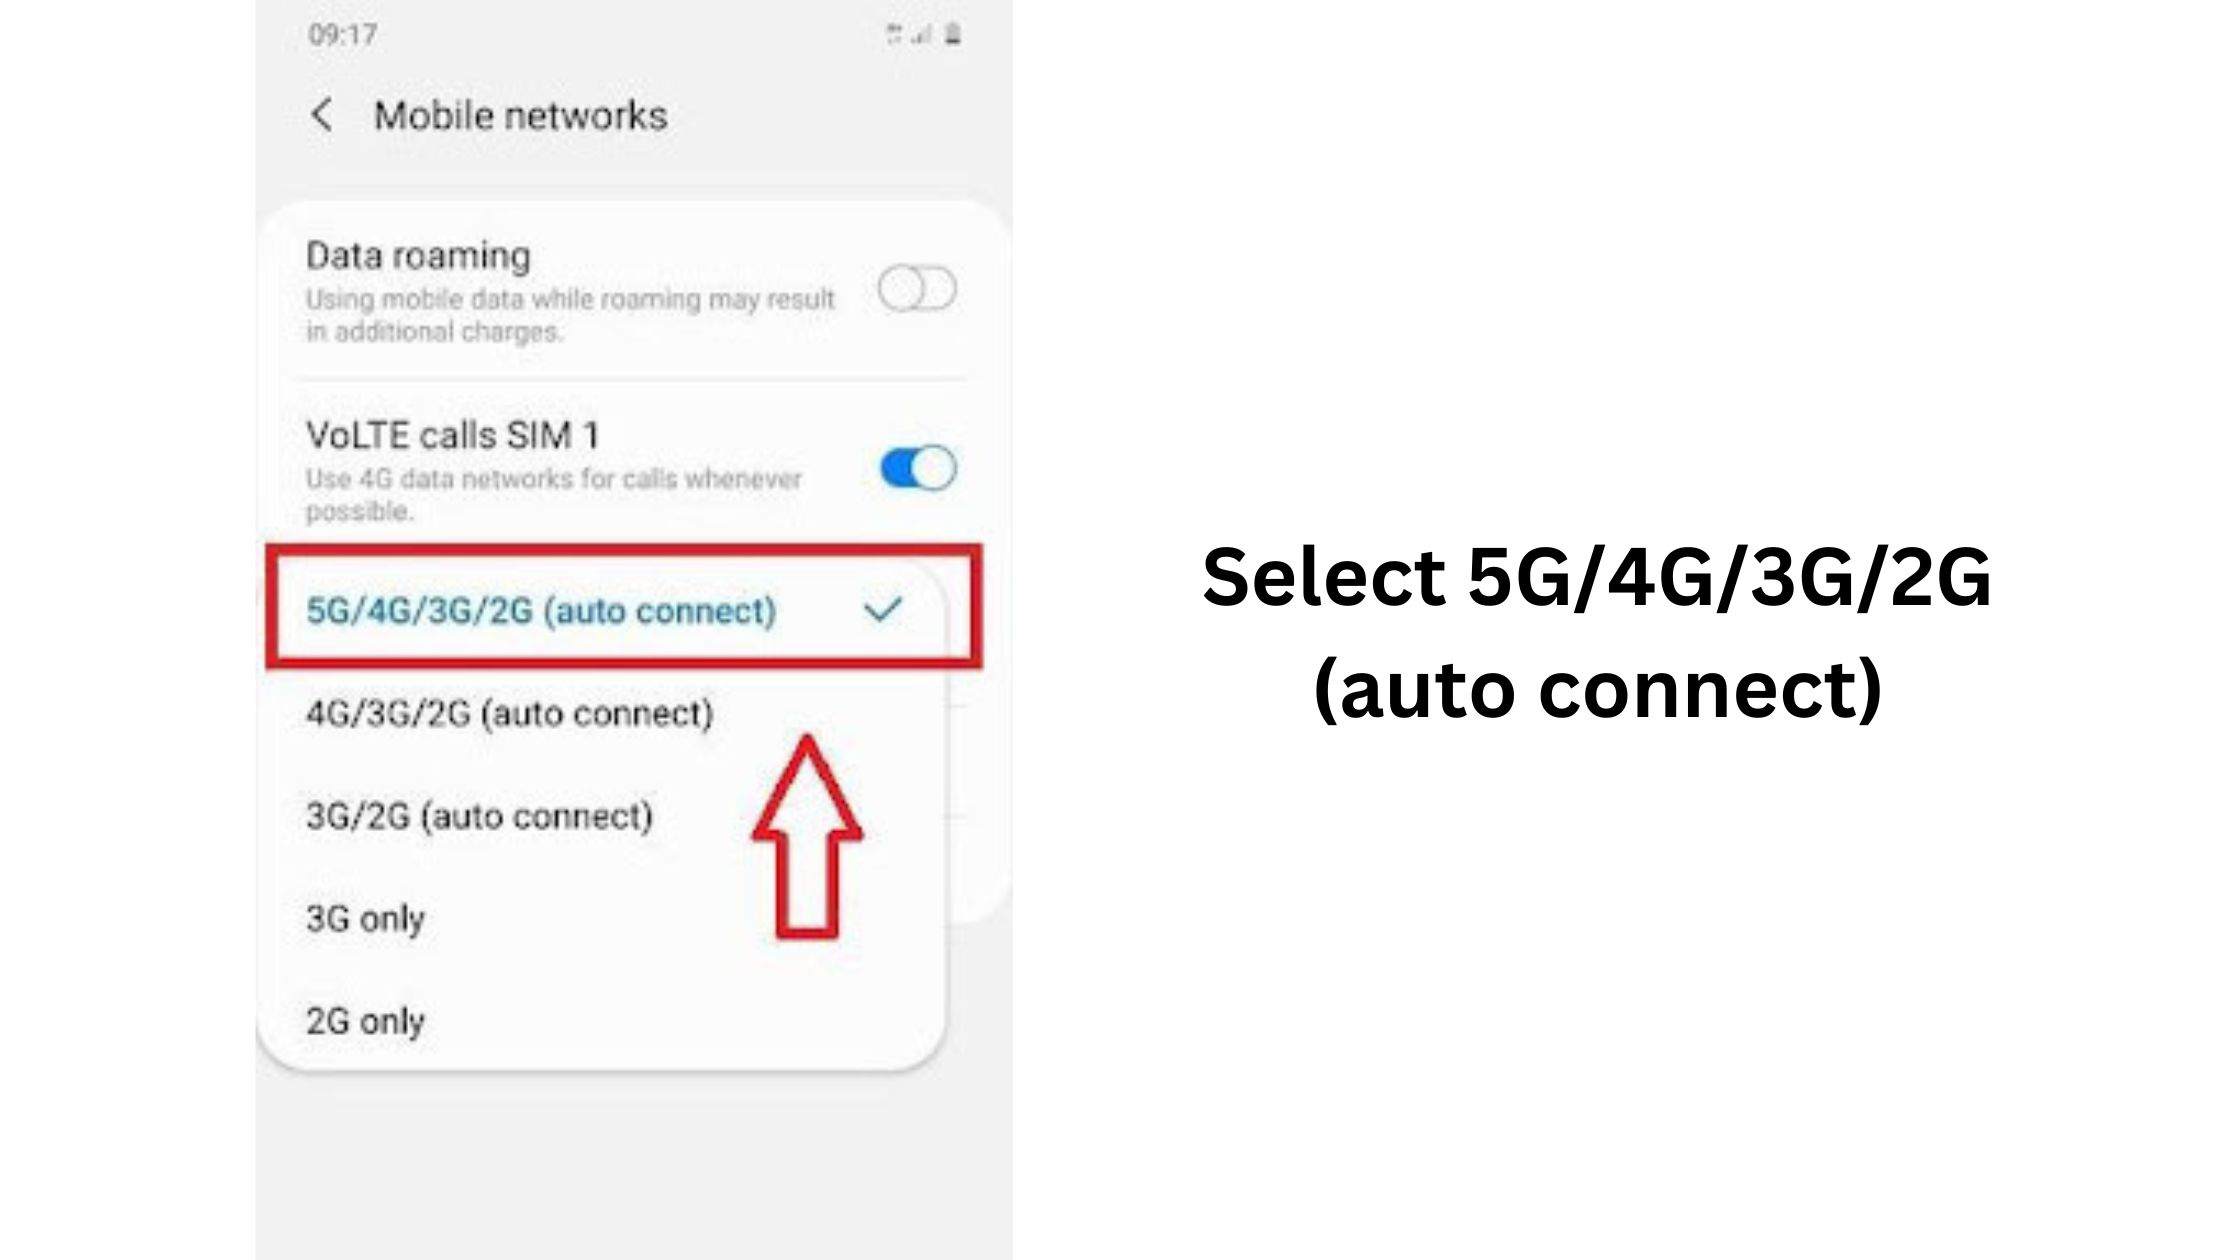 finally select 5G network for activate Airtel 5G data plan on android